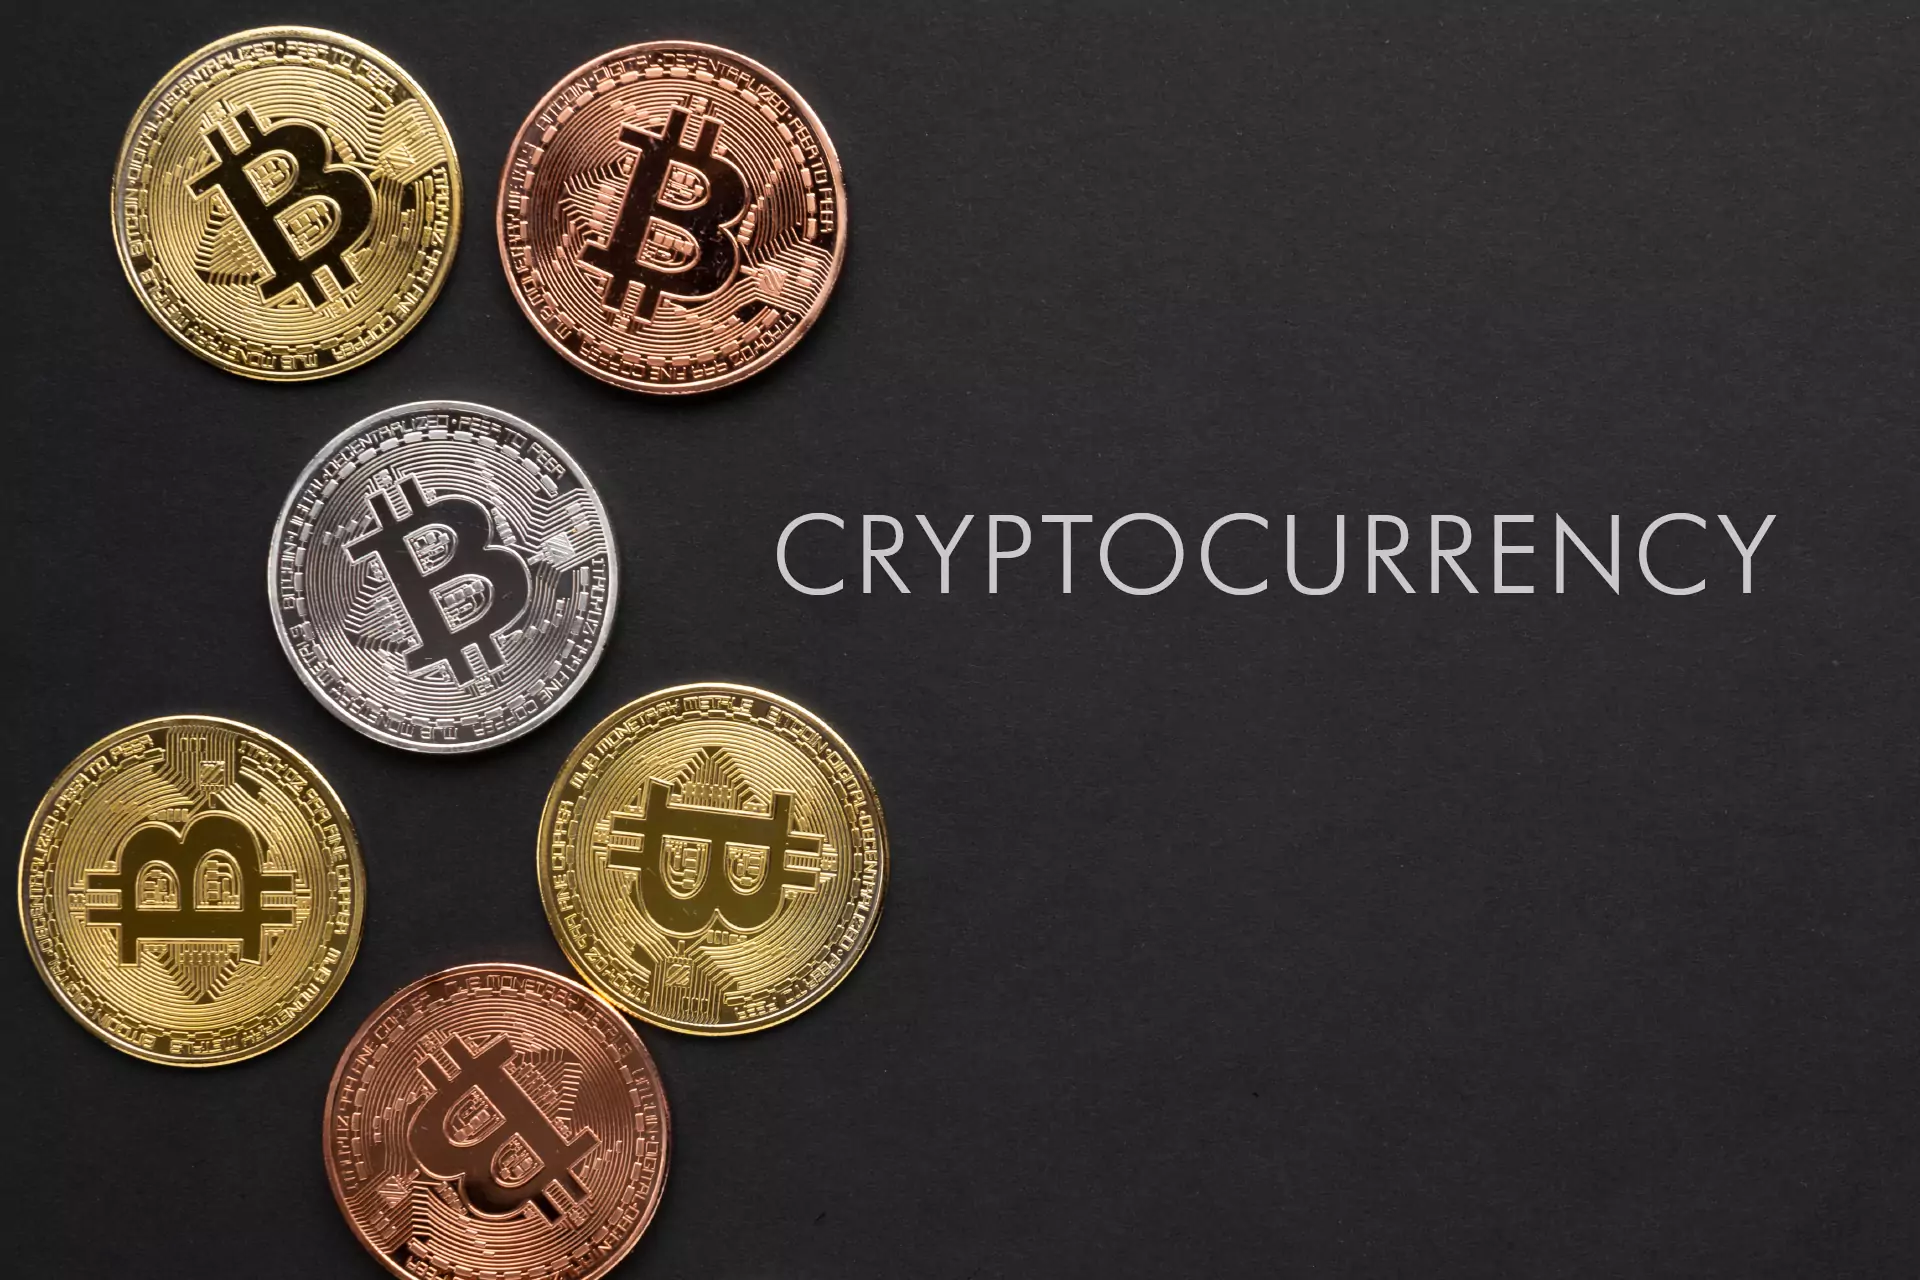 Most bookmakers accept transactions made with cryptocurrency.